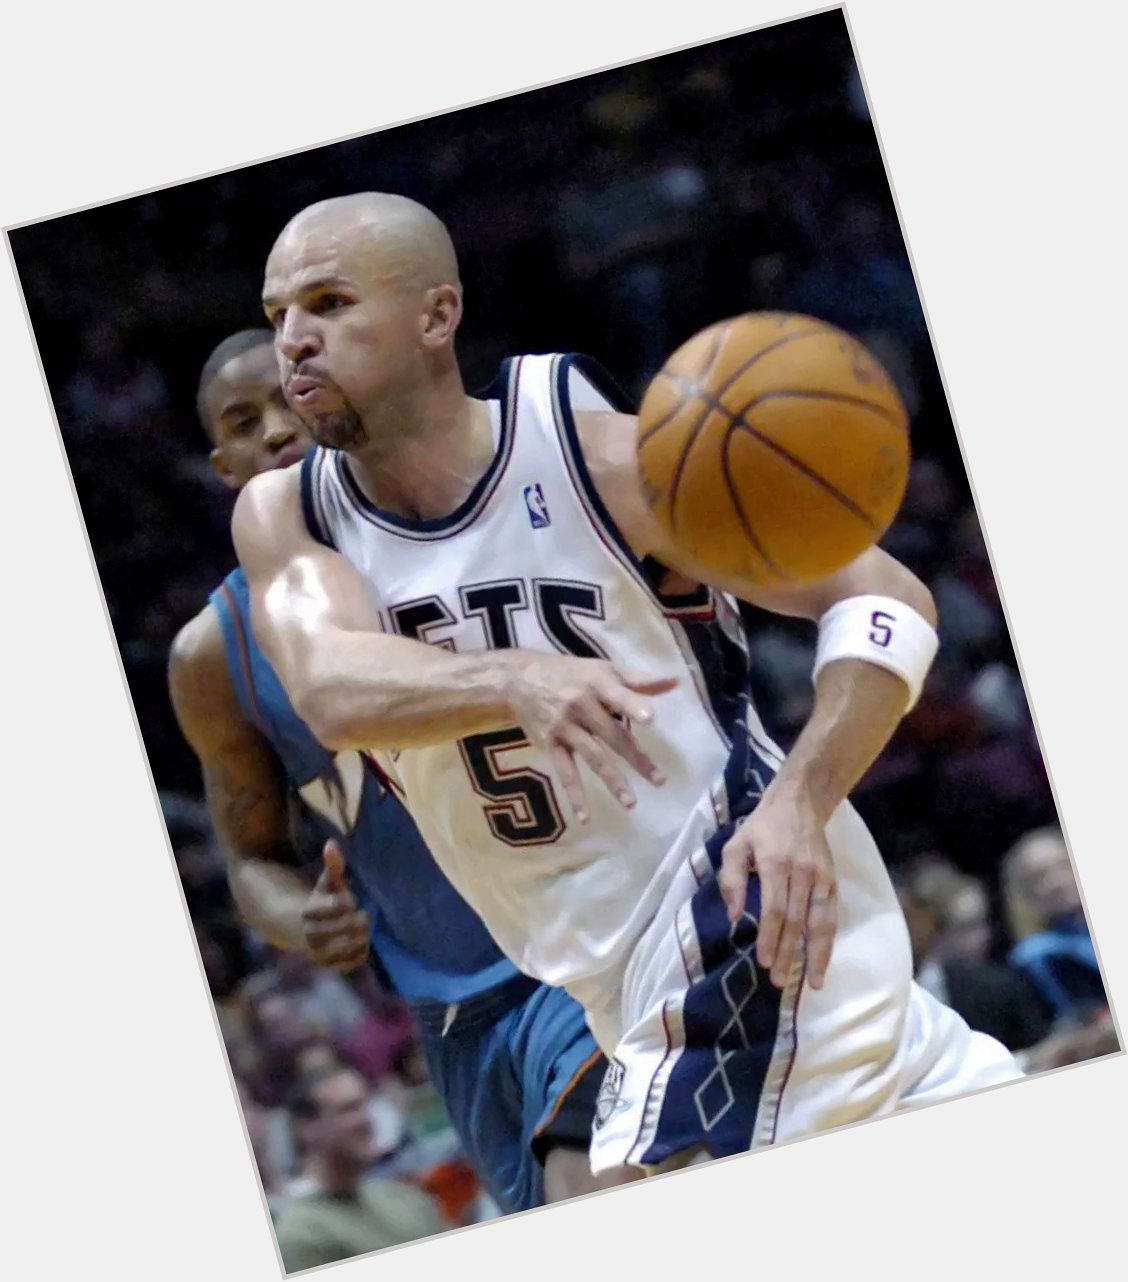 Jason Kidd\s dime package was ELITE Happy 50th birthday to one of the best to ever do it 